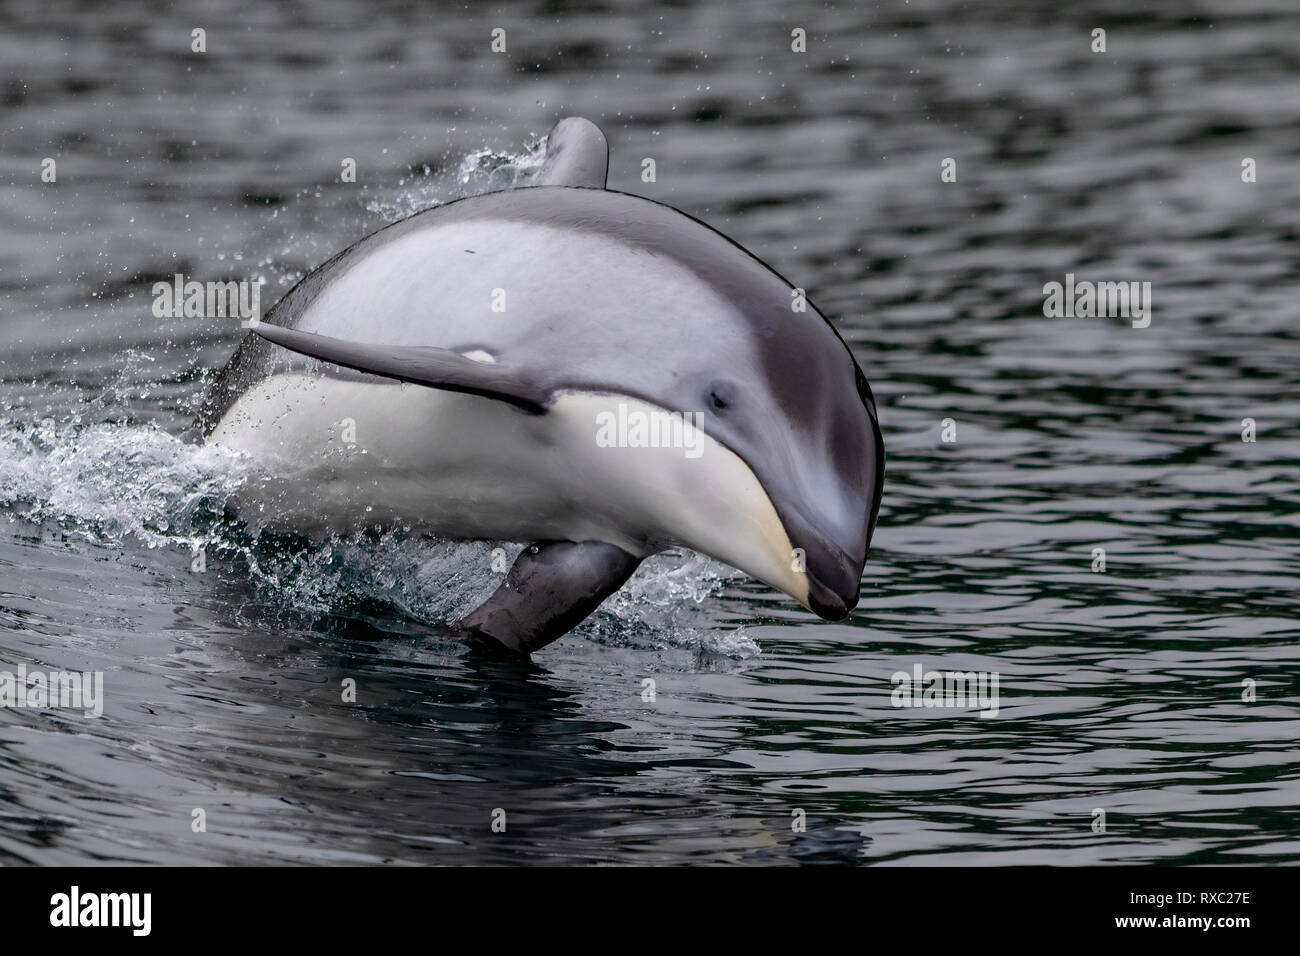 Pacific white-sided dolphin (Lagenorhynchus obliquidens) jumping in the Broughton Archipelago, First Nations Territory, British Columbia, Canada. Stock Photo